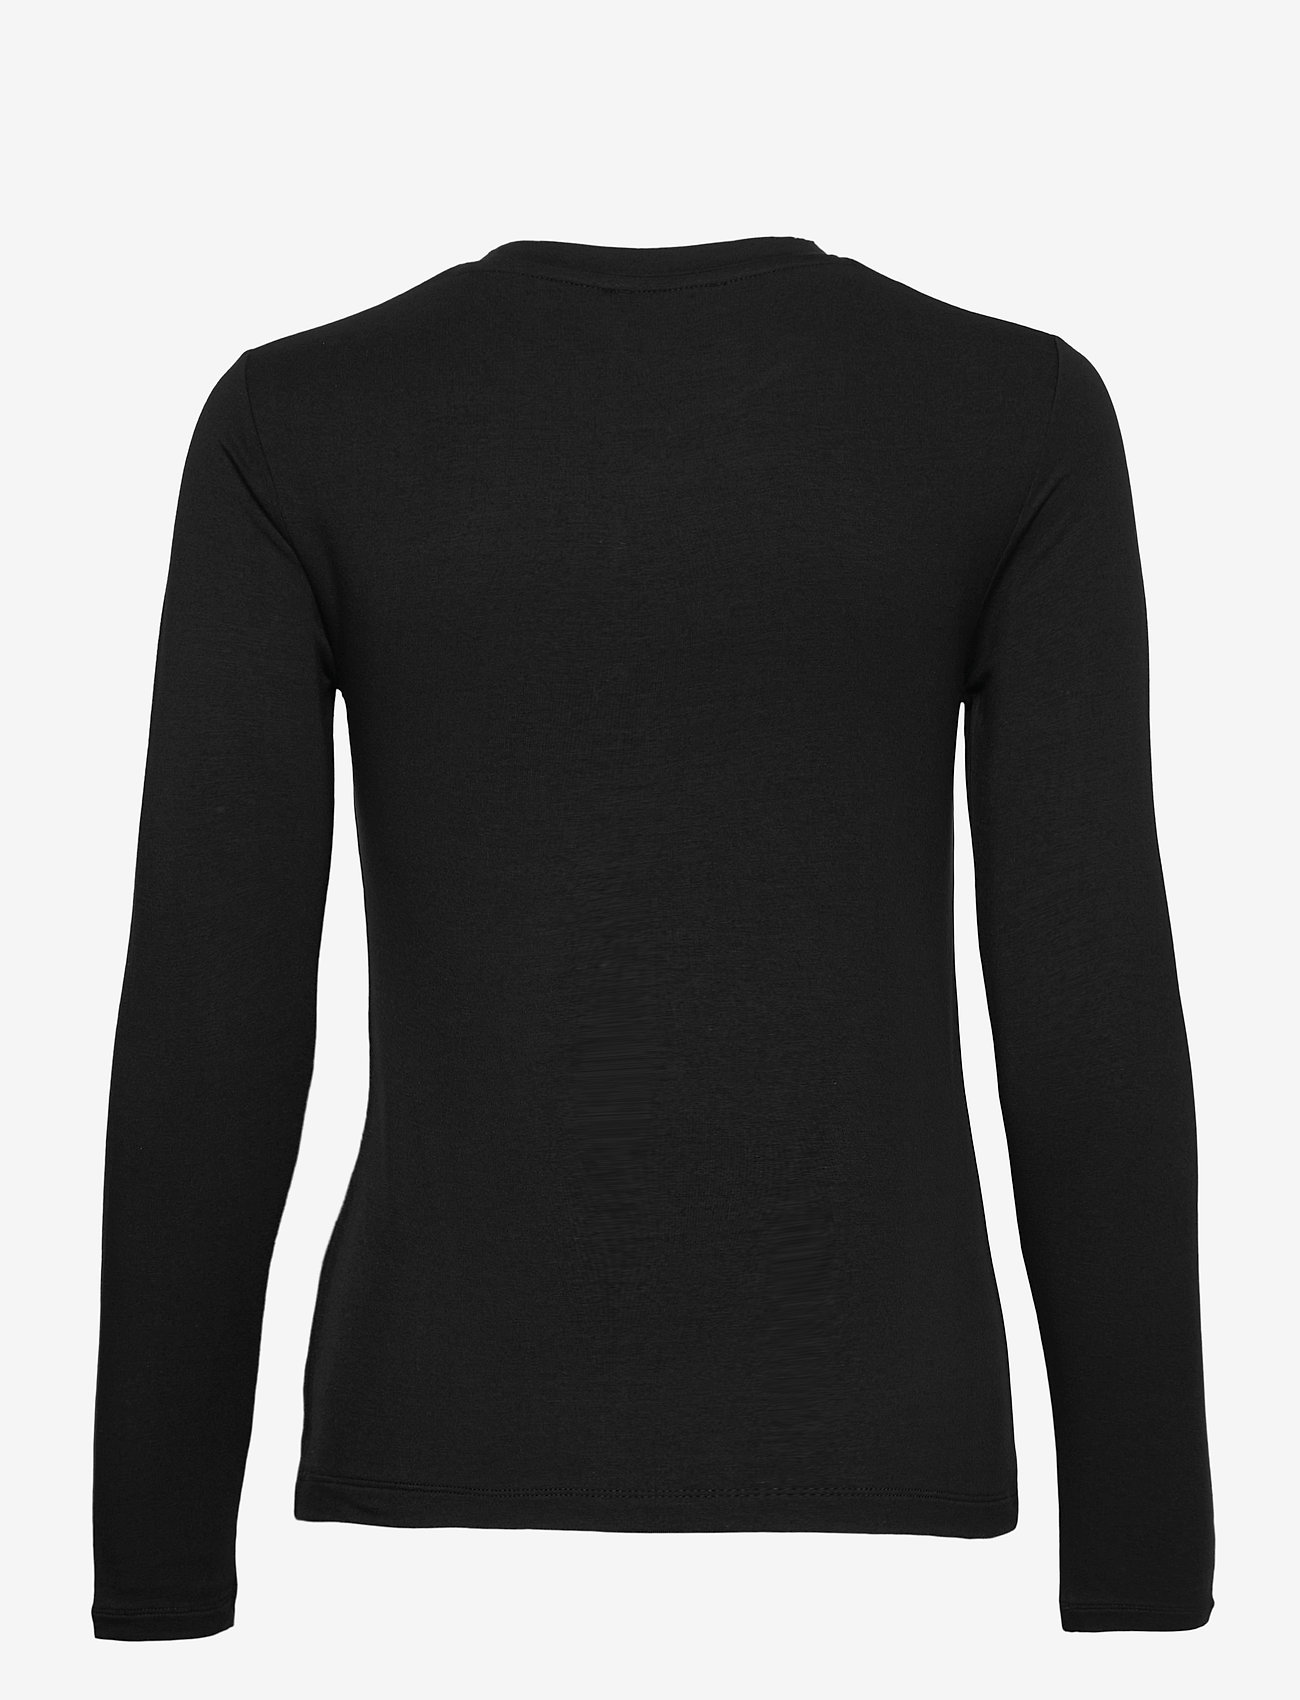 Stylein - CANVEY - long-sleeved tops - black - 2